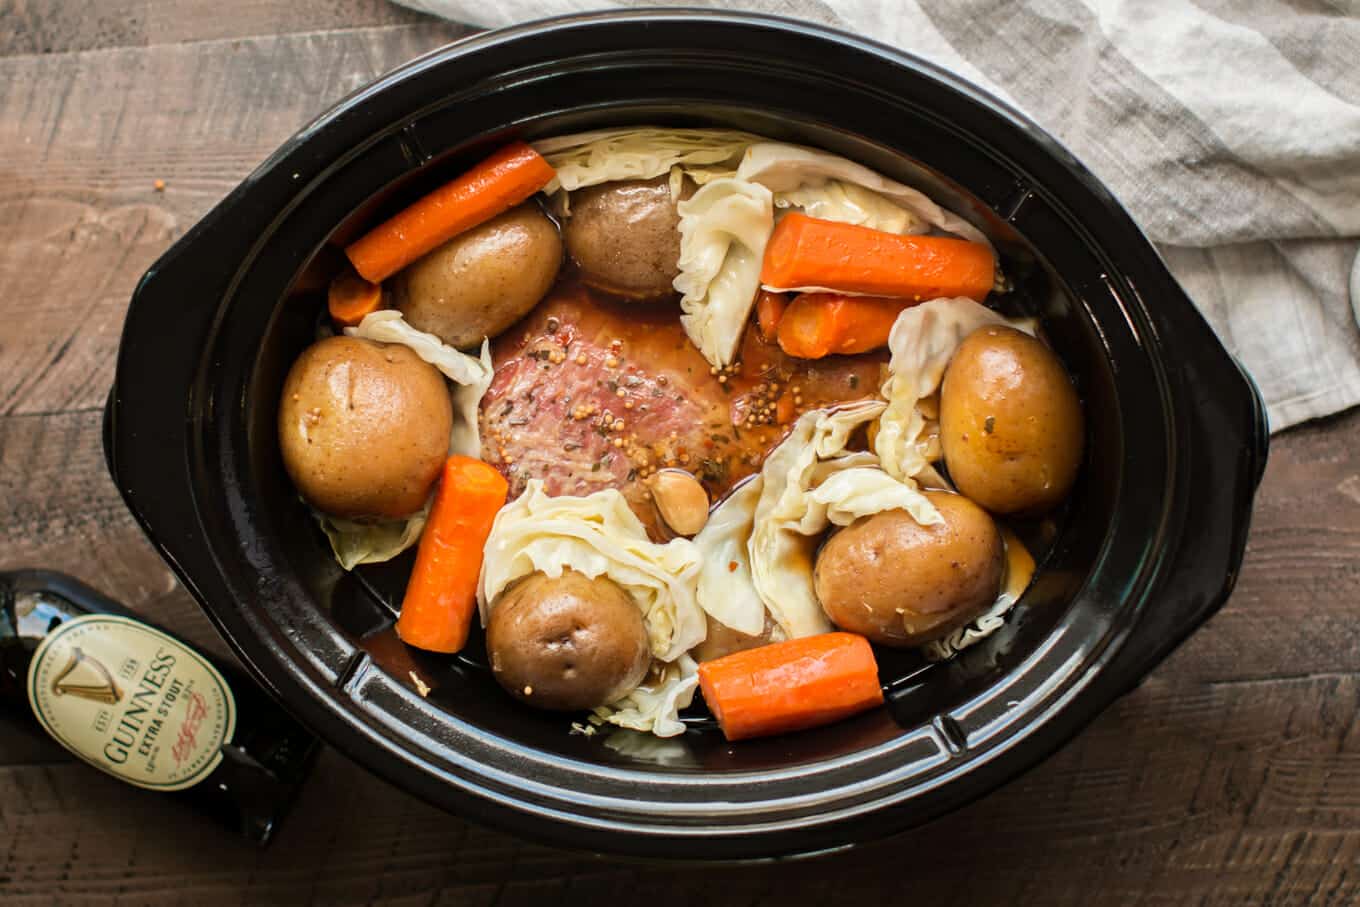 corned beef in slow cooker with potatoes, carrots and cabbage, done cooking.